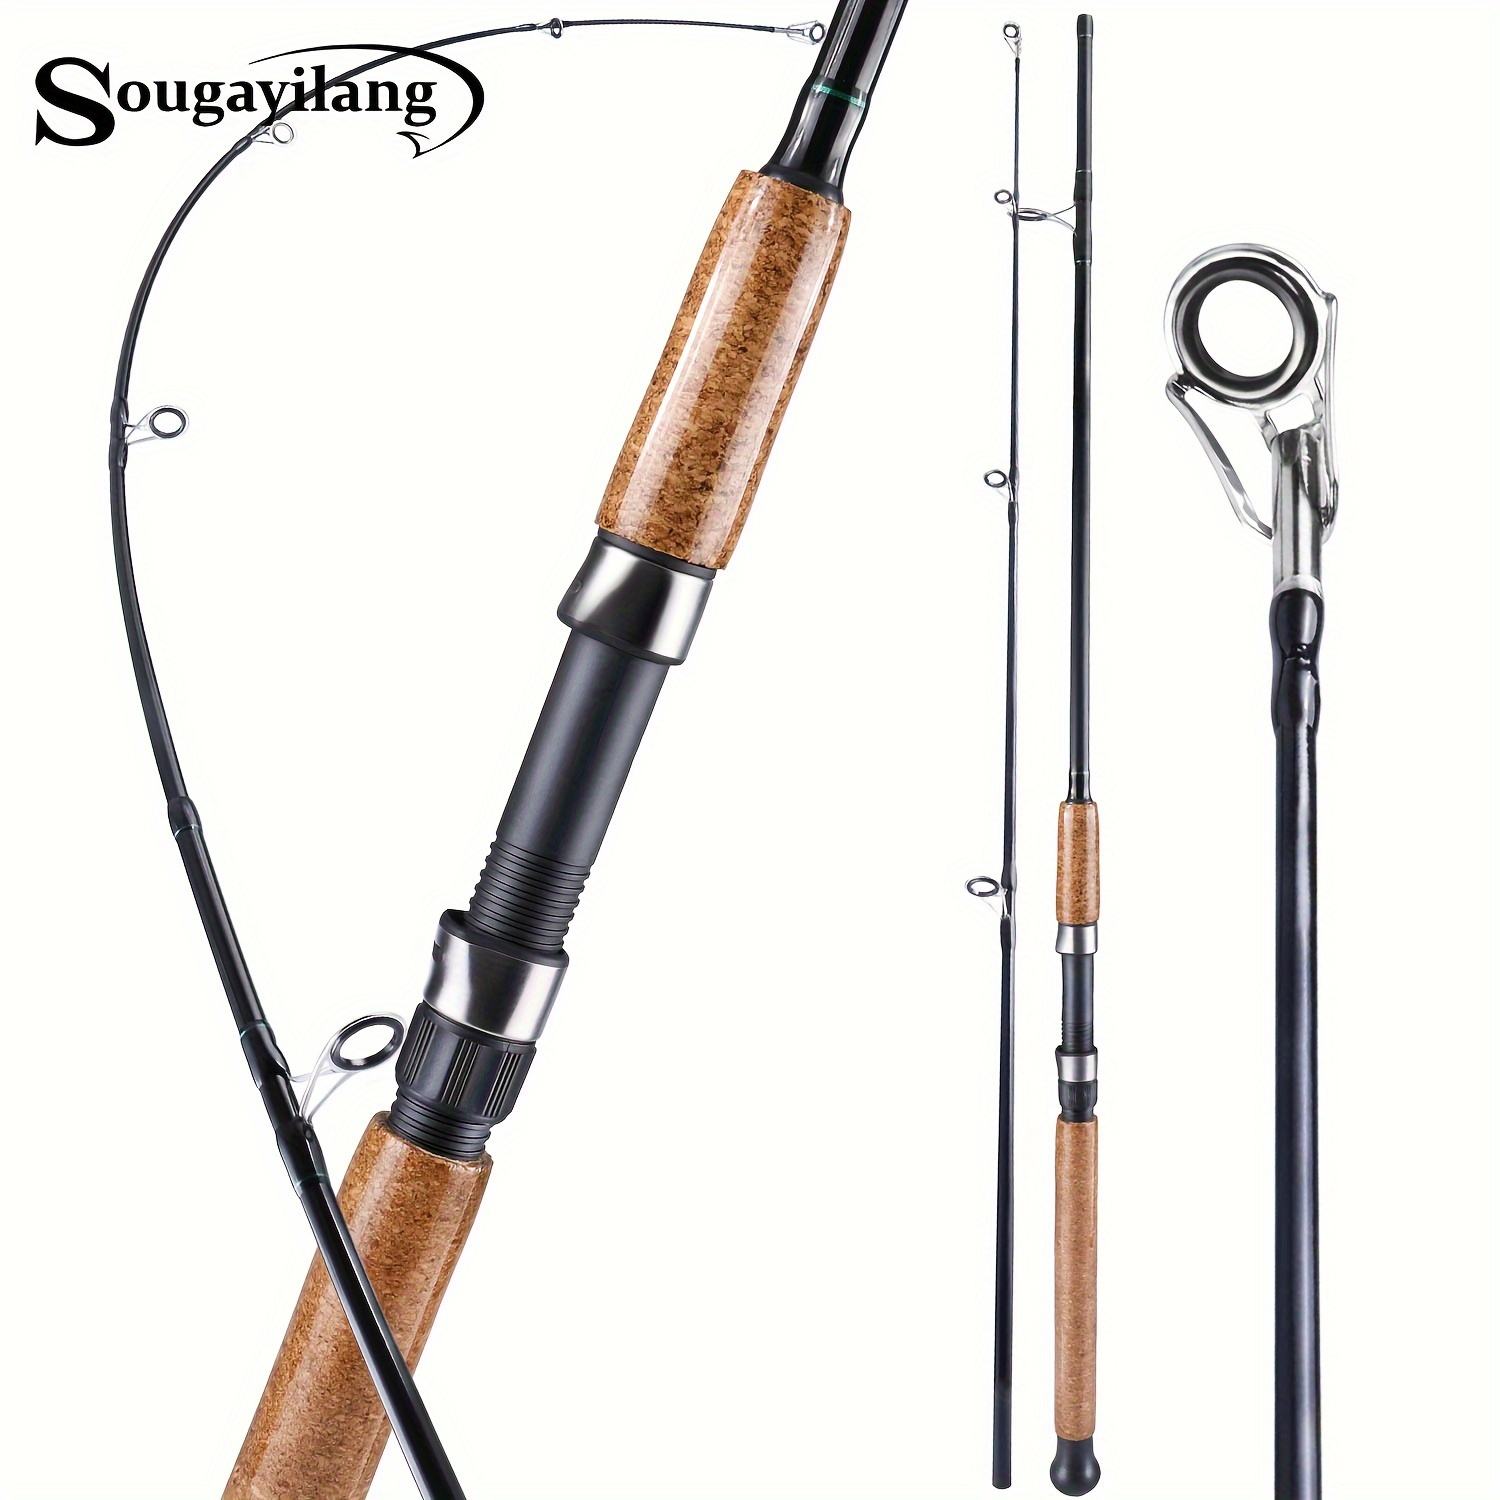 Sougayilang 2-section Carbon Fiber Fishing Rod, Comfort Grip Spinning Rod  For Freshwater, Gift For Beginners